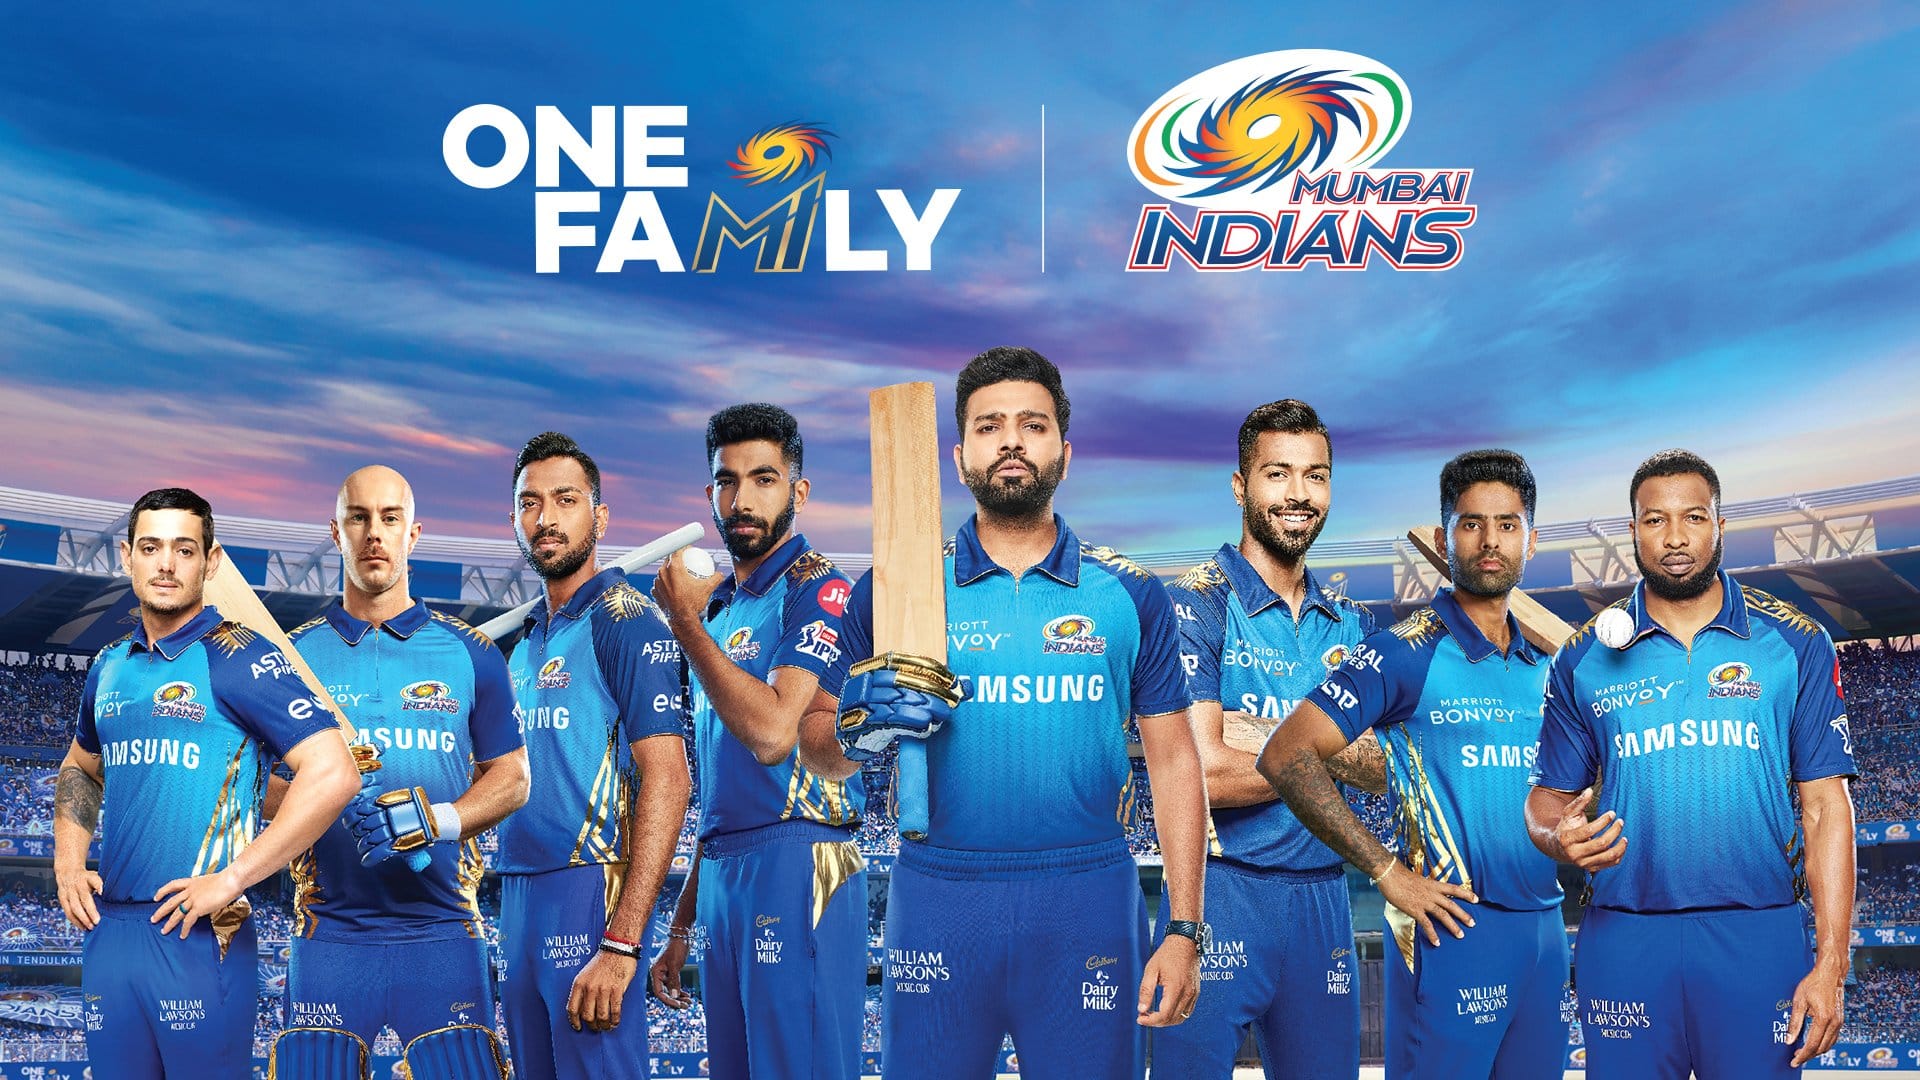 IPL 2020: Mumbai Indians have released their theme campaign, One family, Mumbai Indians